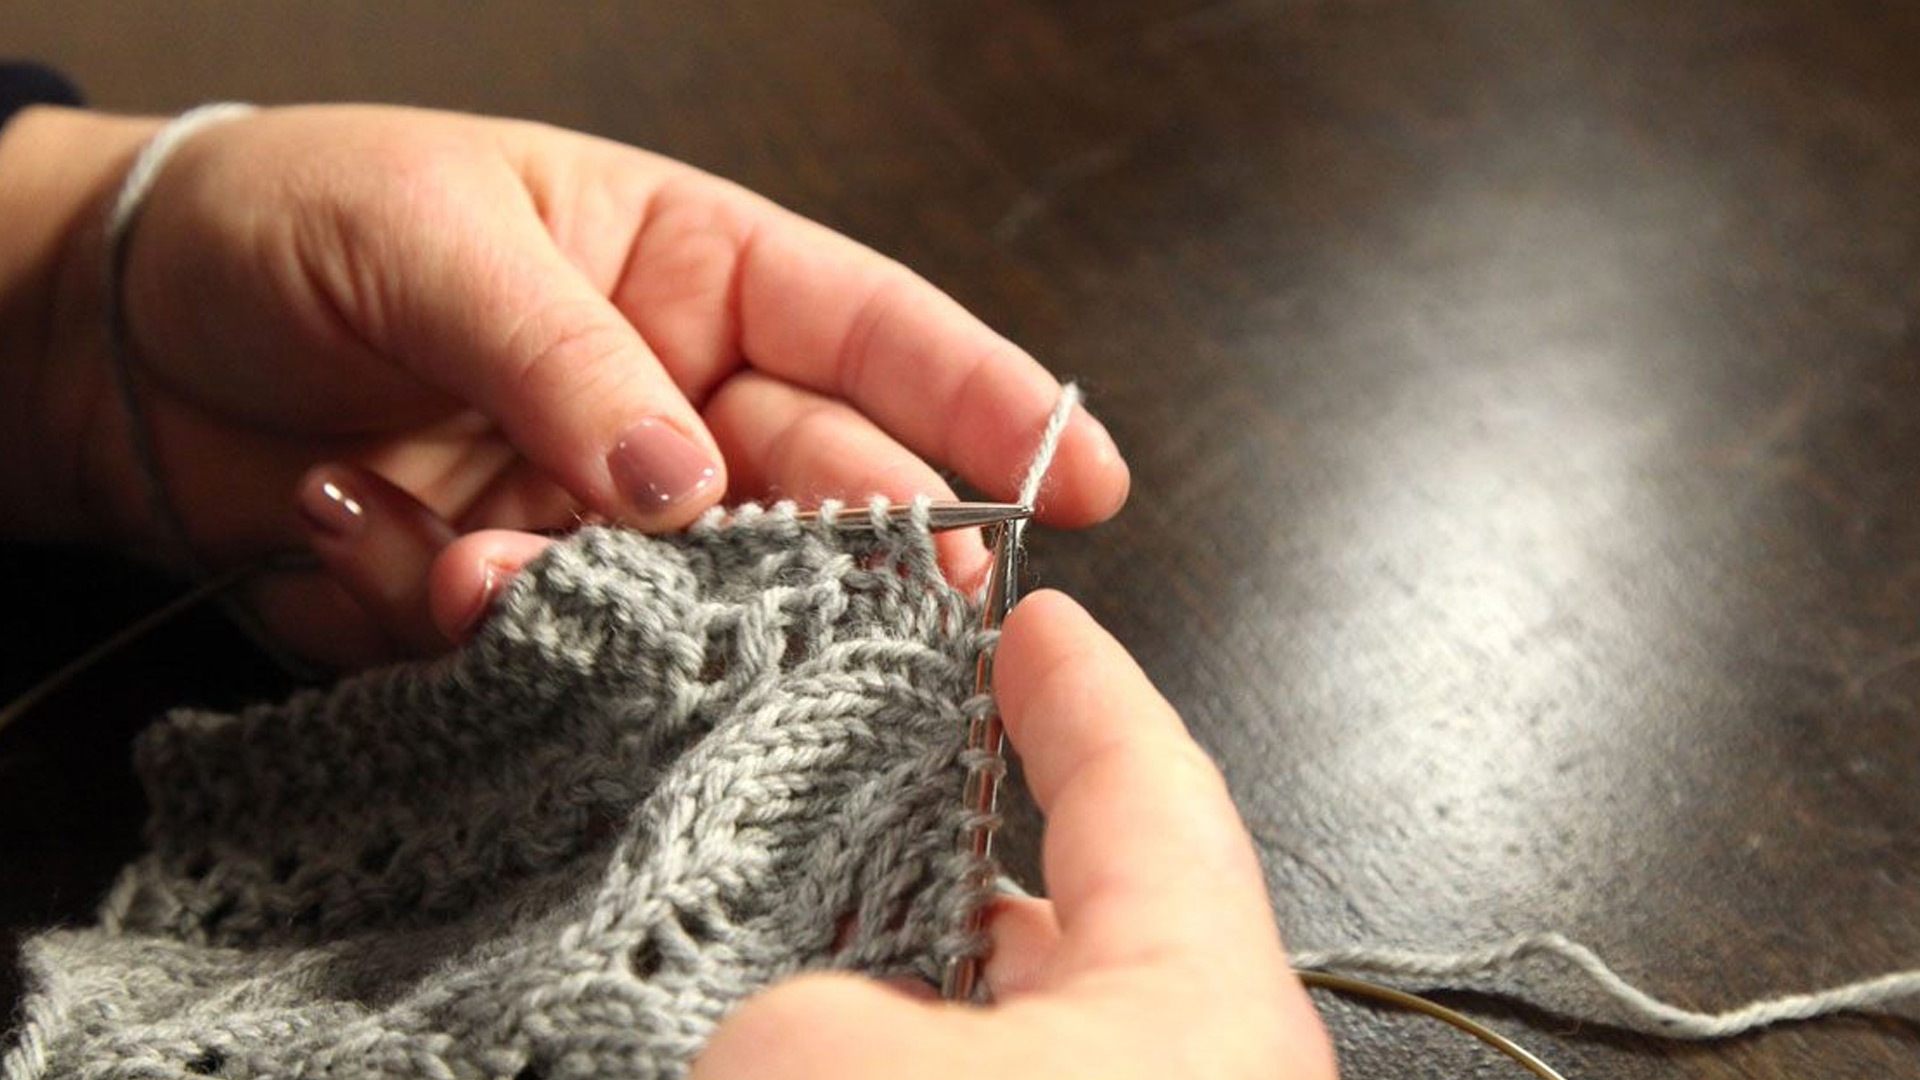 How to knit Faster?